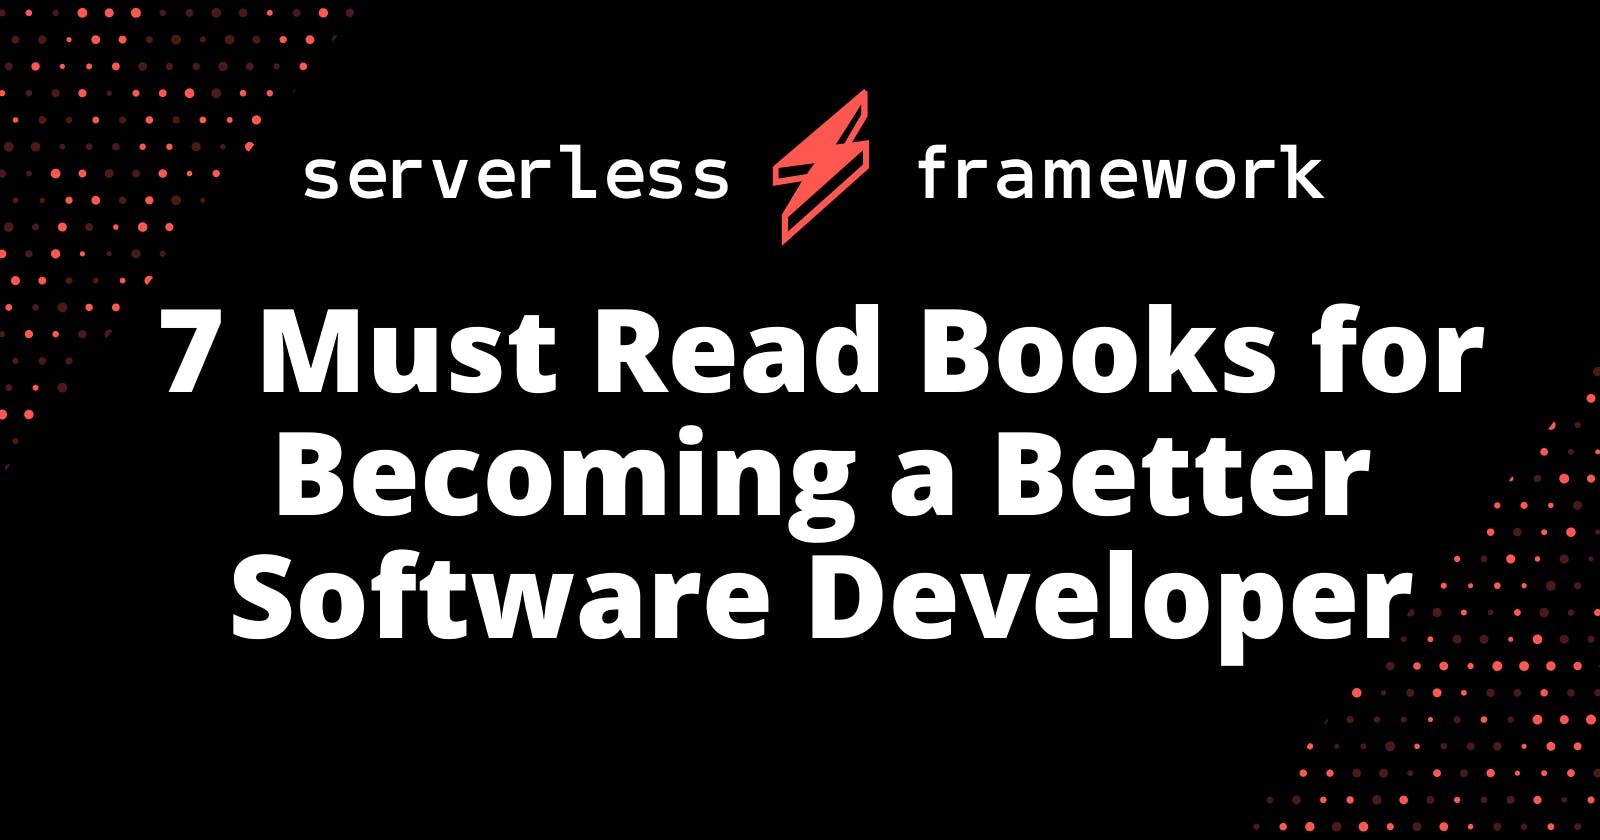 7 Must Read Books for Becoming a Better Software Developer